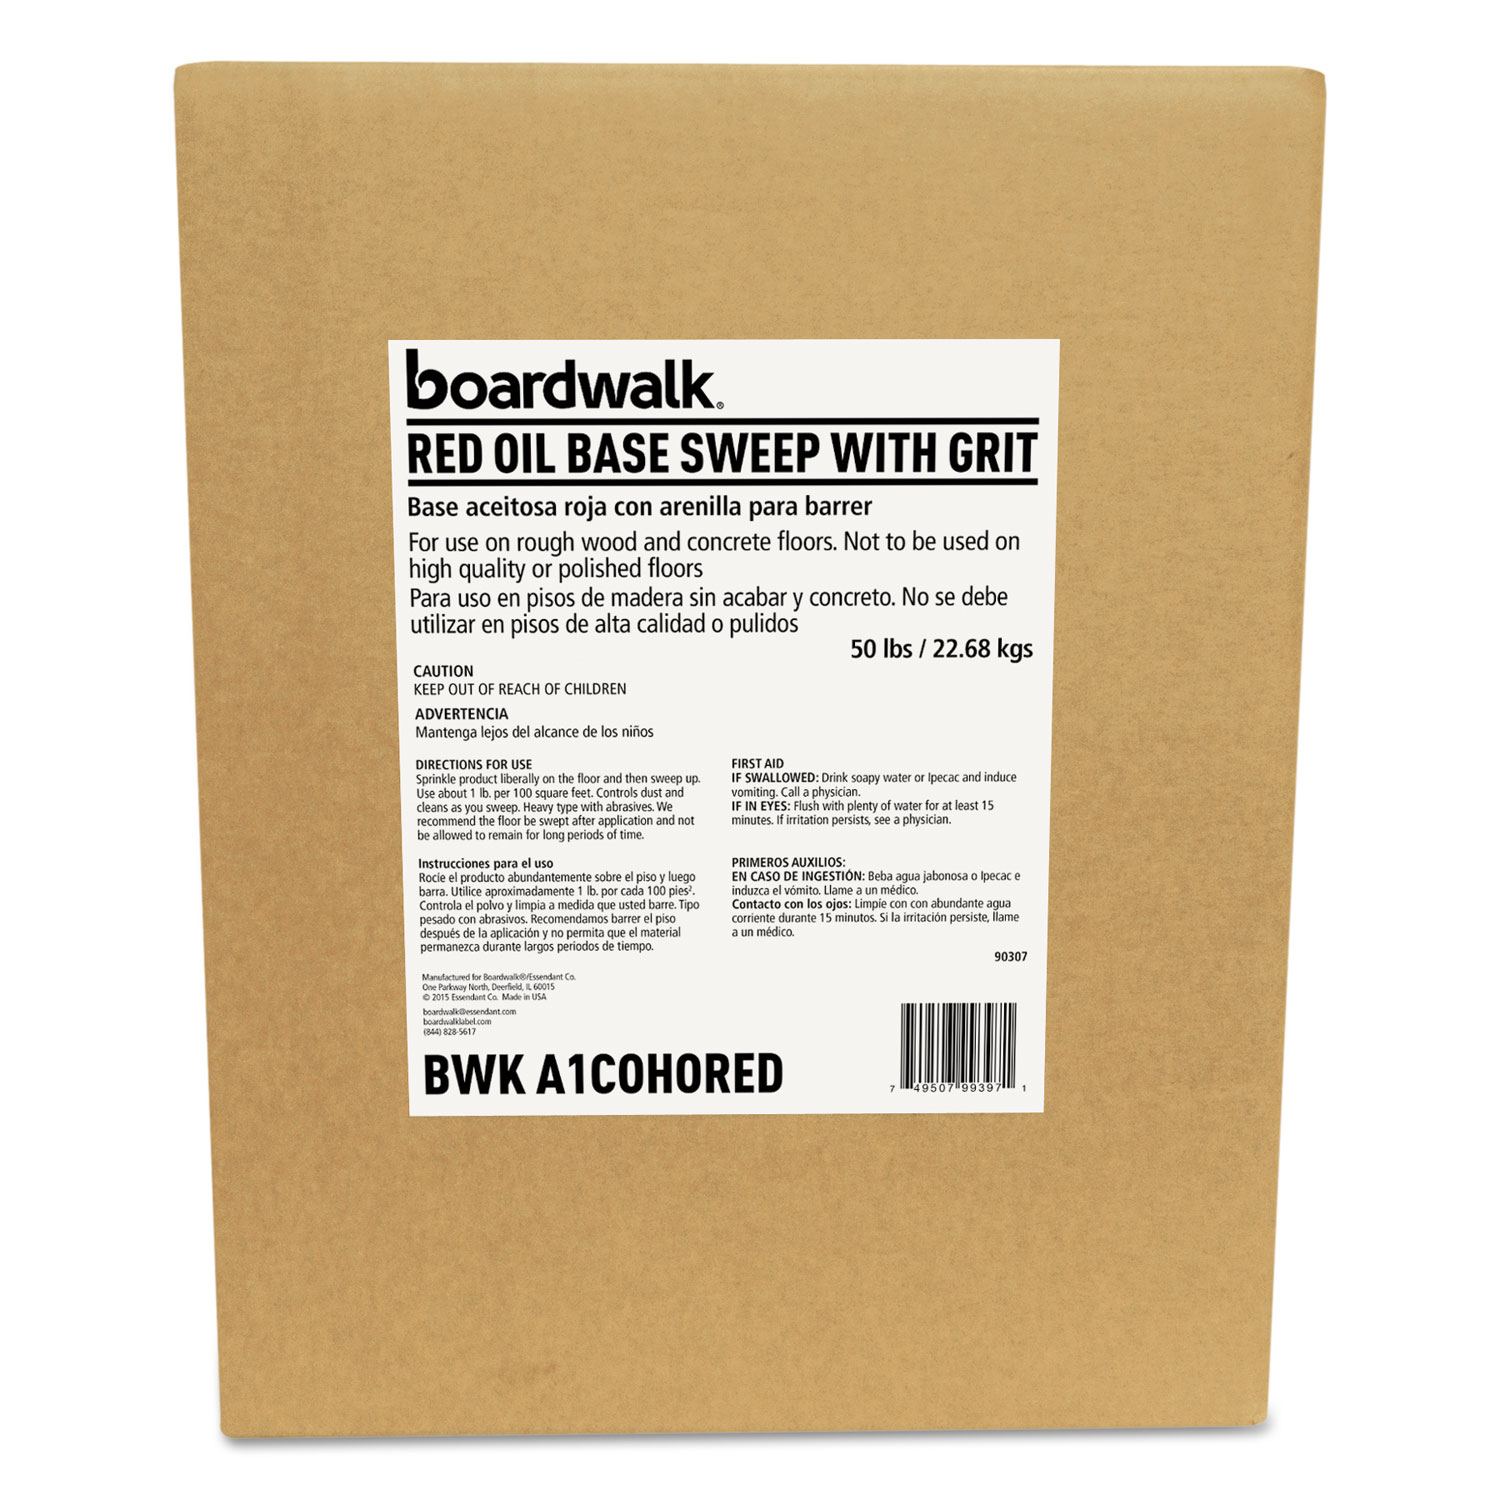  Boardwalk BWKA1COHORED Oil-Based Sweeping Compound, Grit, Red, 50lbs, Box (BWKA1COHORED) 